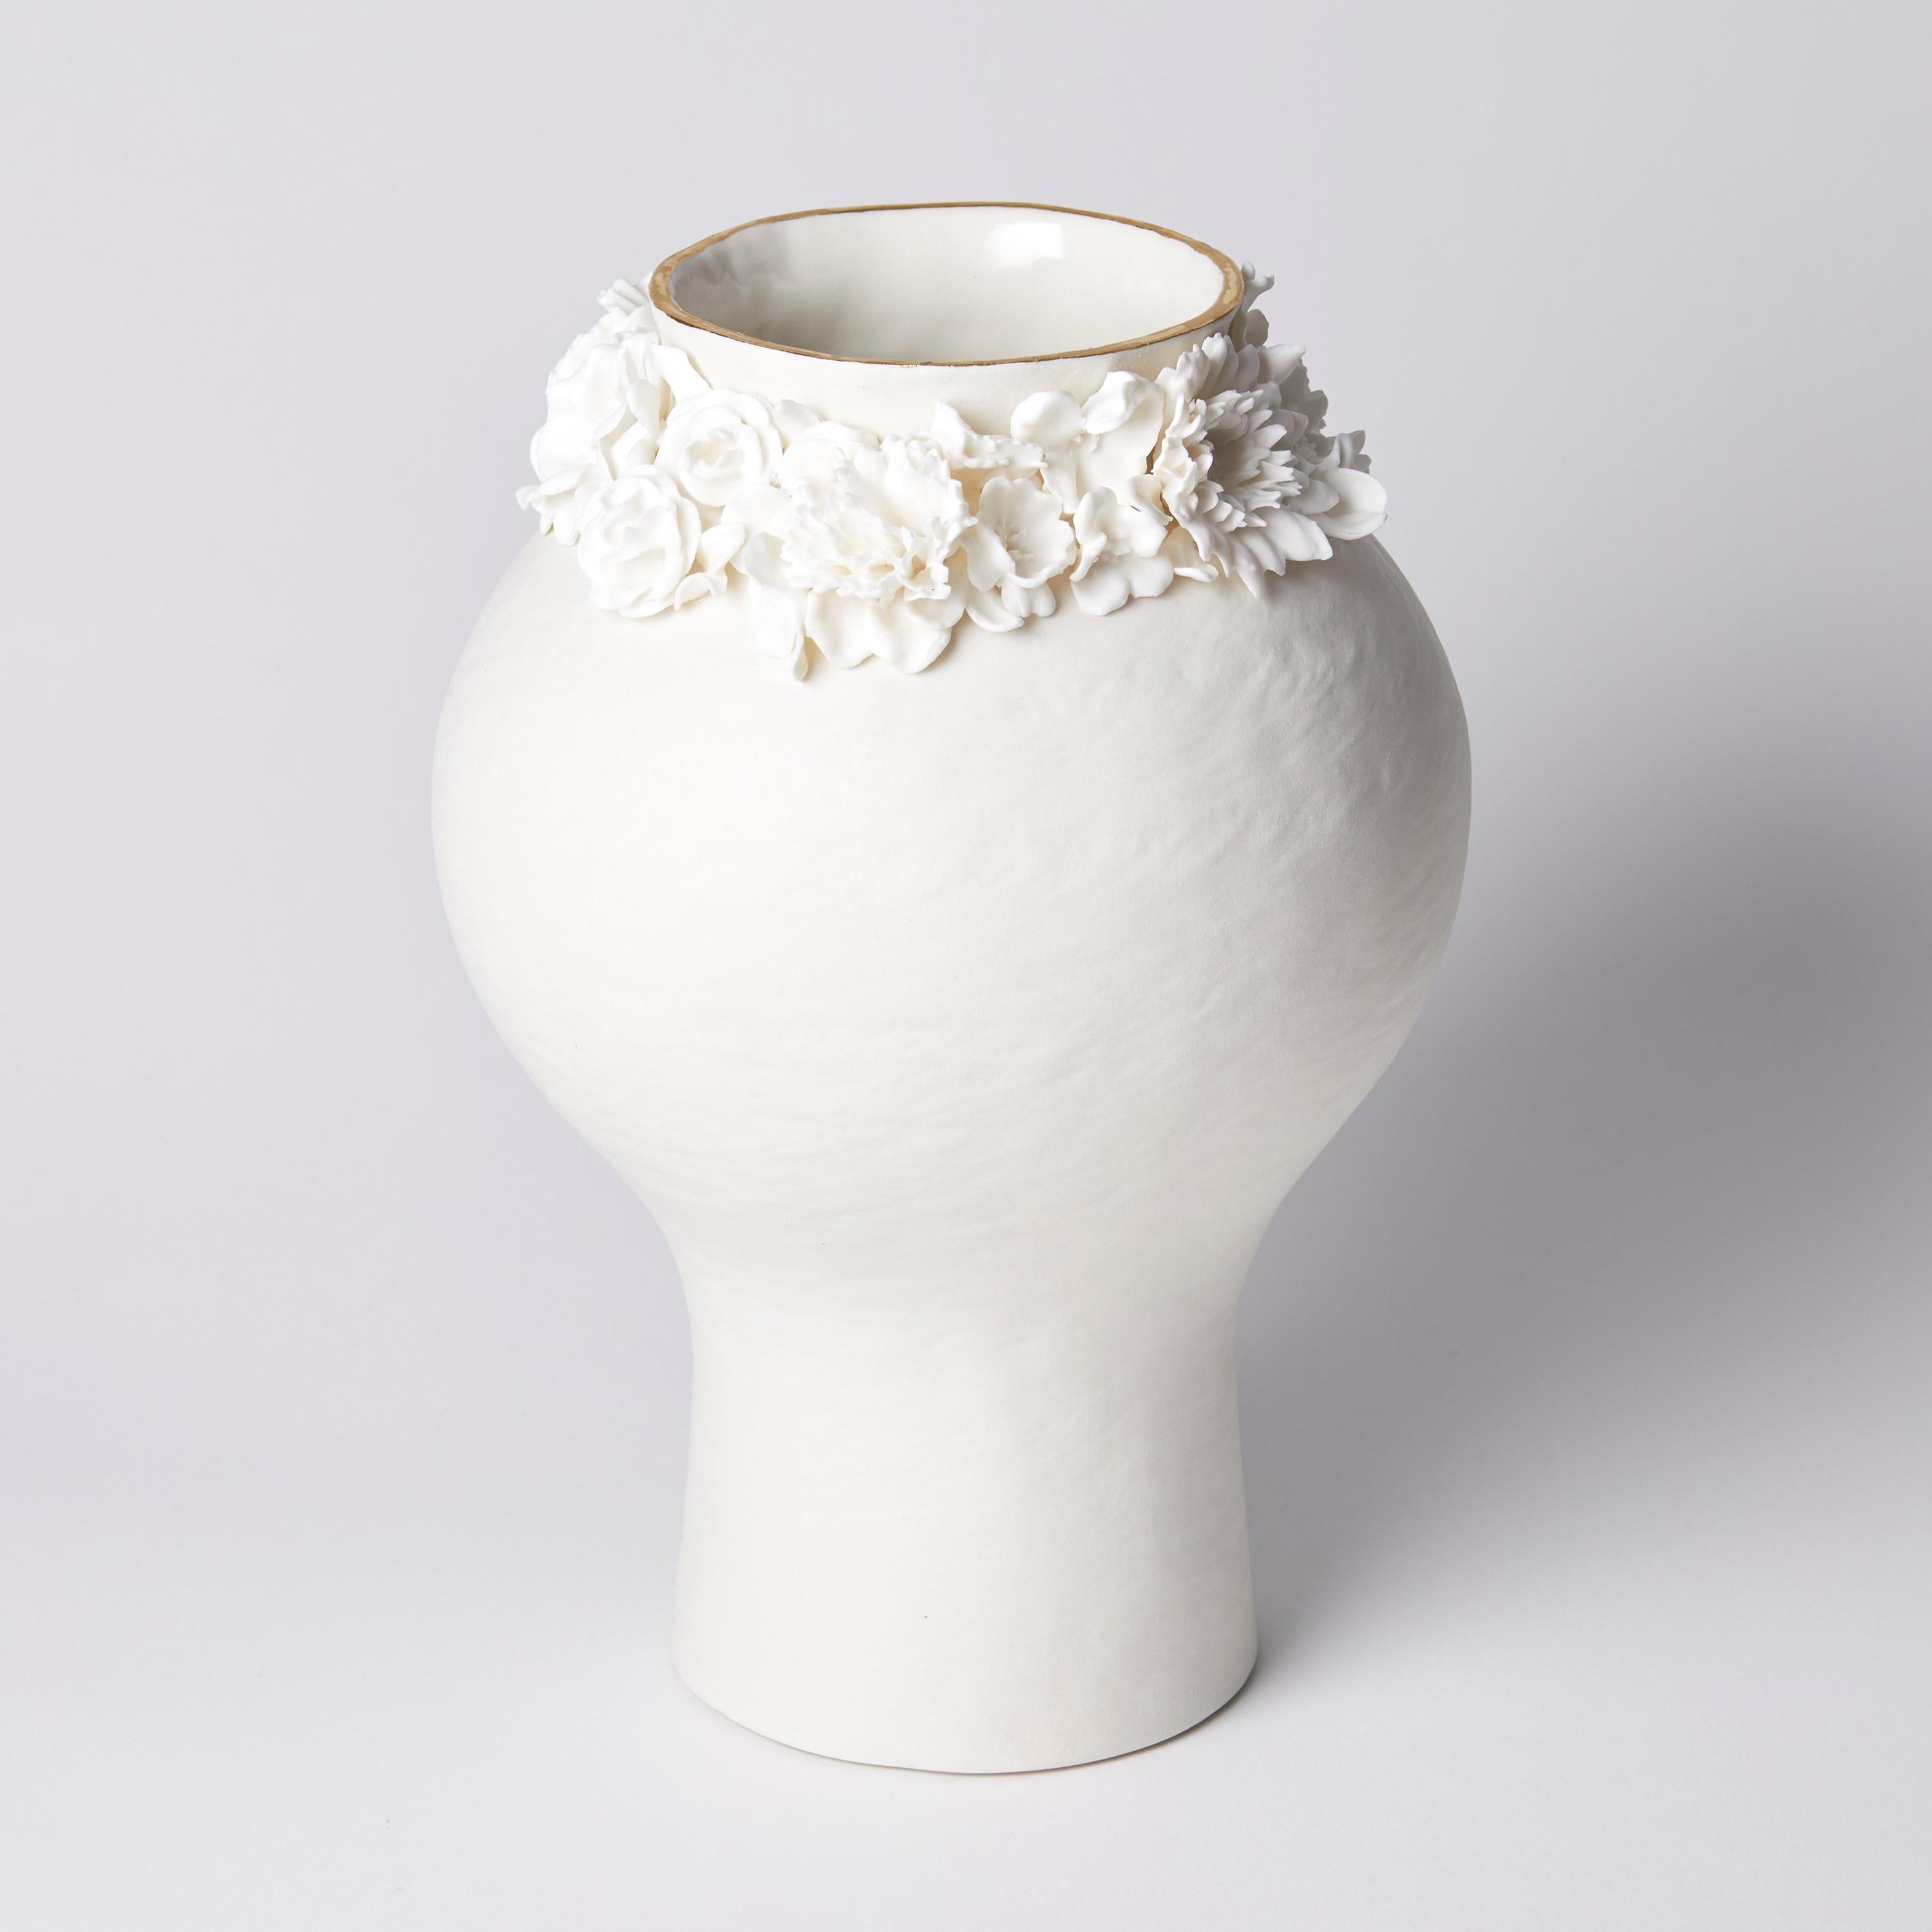 'Forget Me Not VI' is a unique porcelain sculptural vessel by the British artist, Amy Hughes.

Originally from West Yorkshire, Amy Hughes lives and works in London. She shares a studio with 10 of her former students from the Royal College of Art,